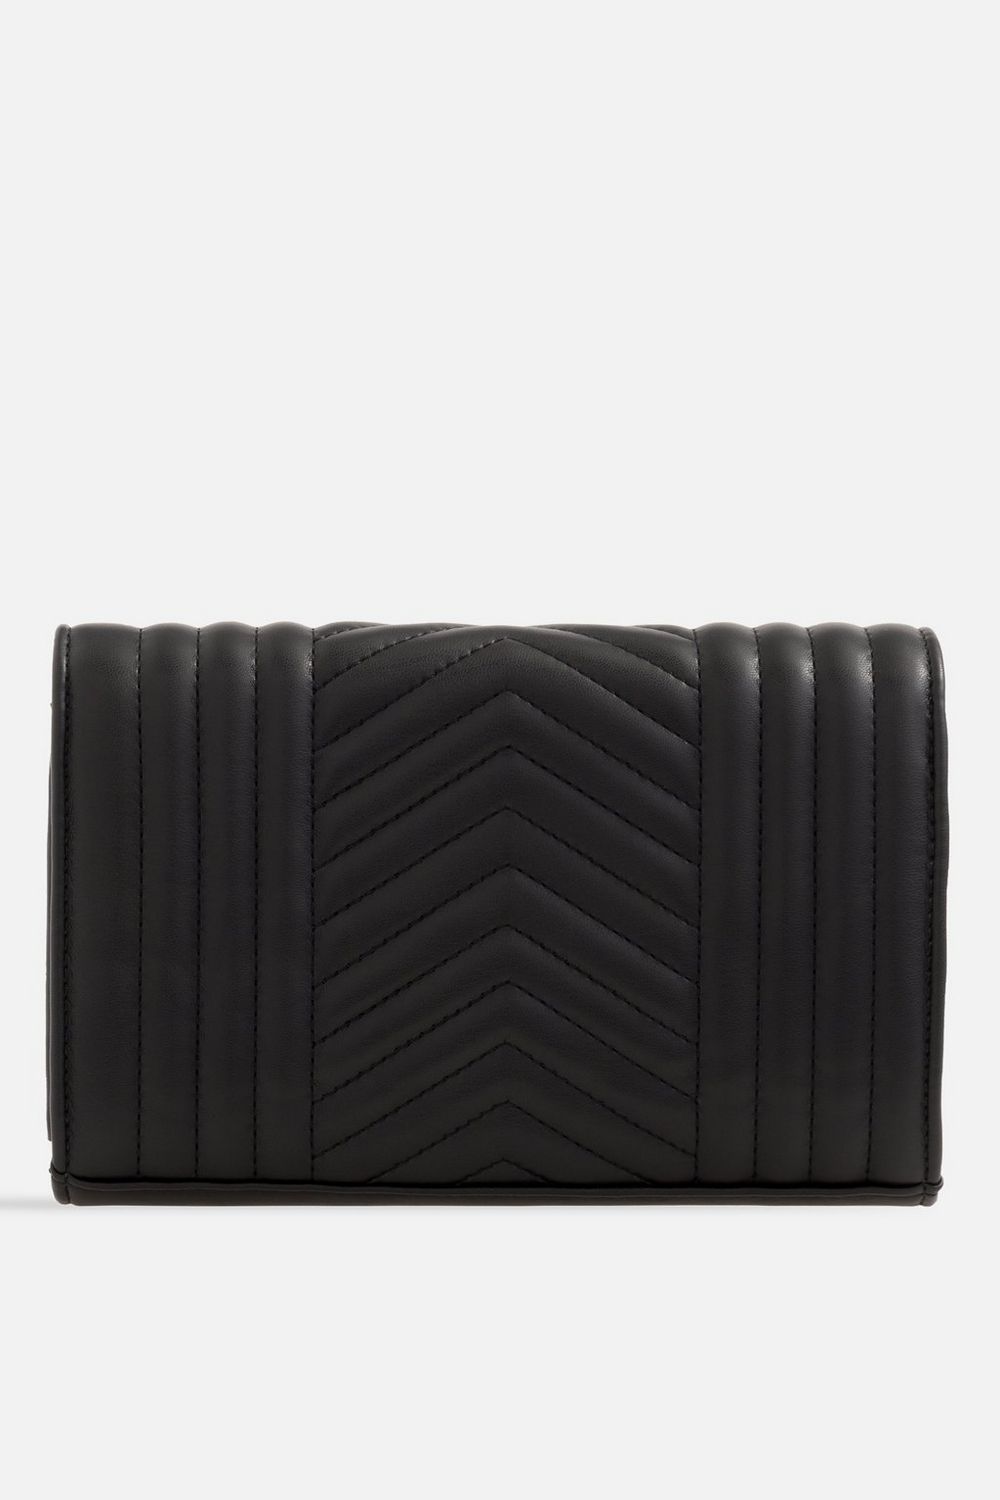 TOPSHOP - QUILTED SOFT FAUX LEATHER CLUTCH